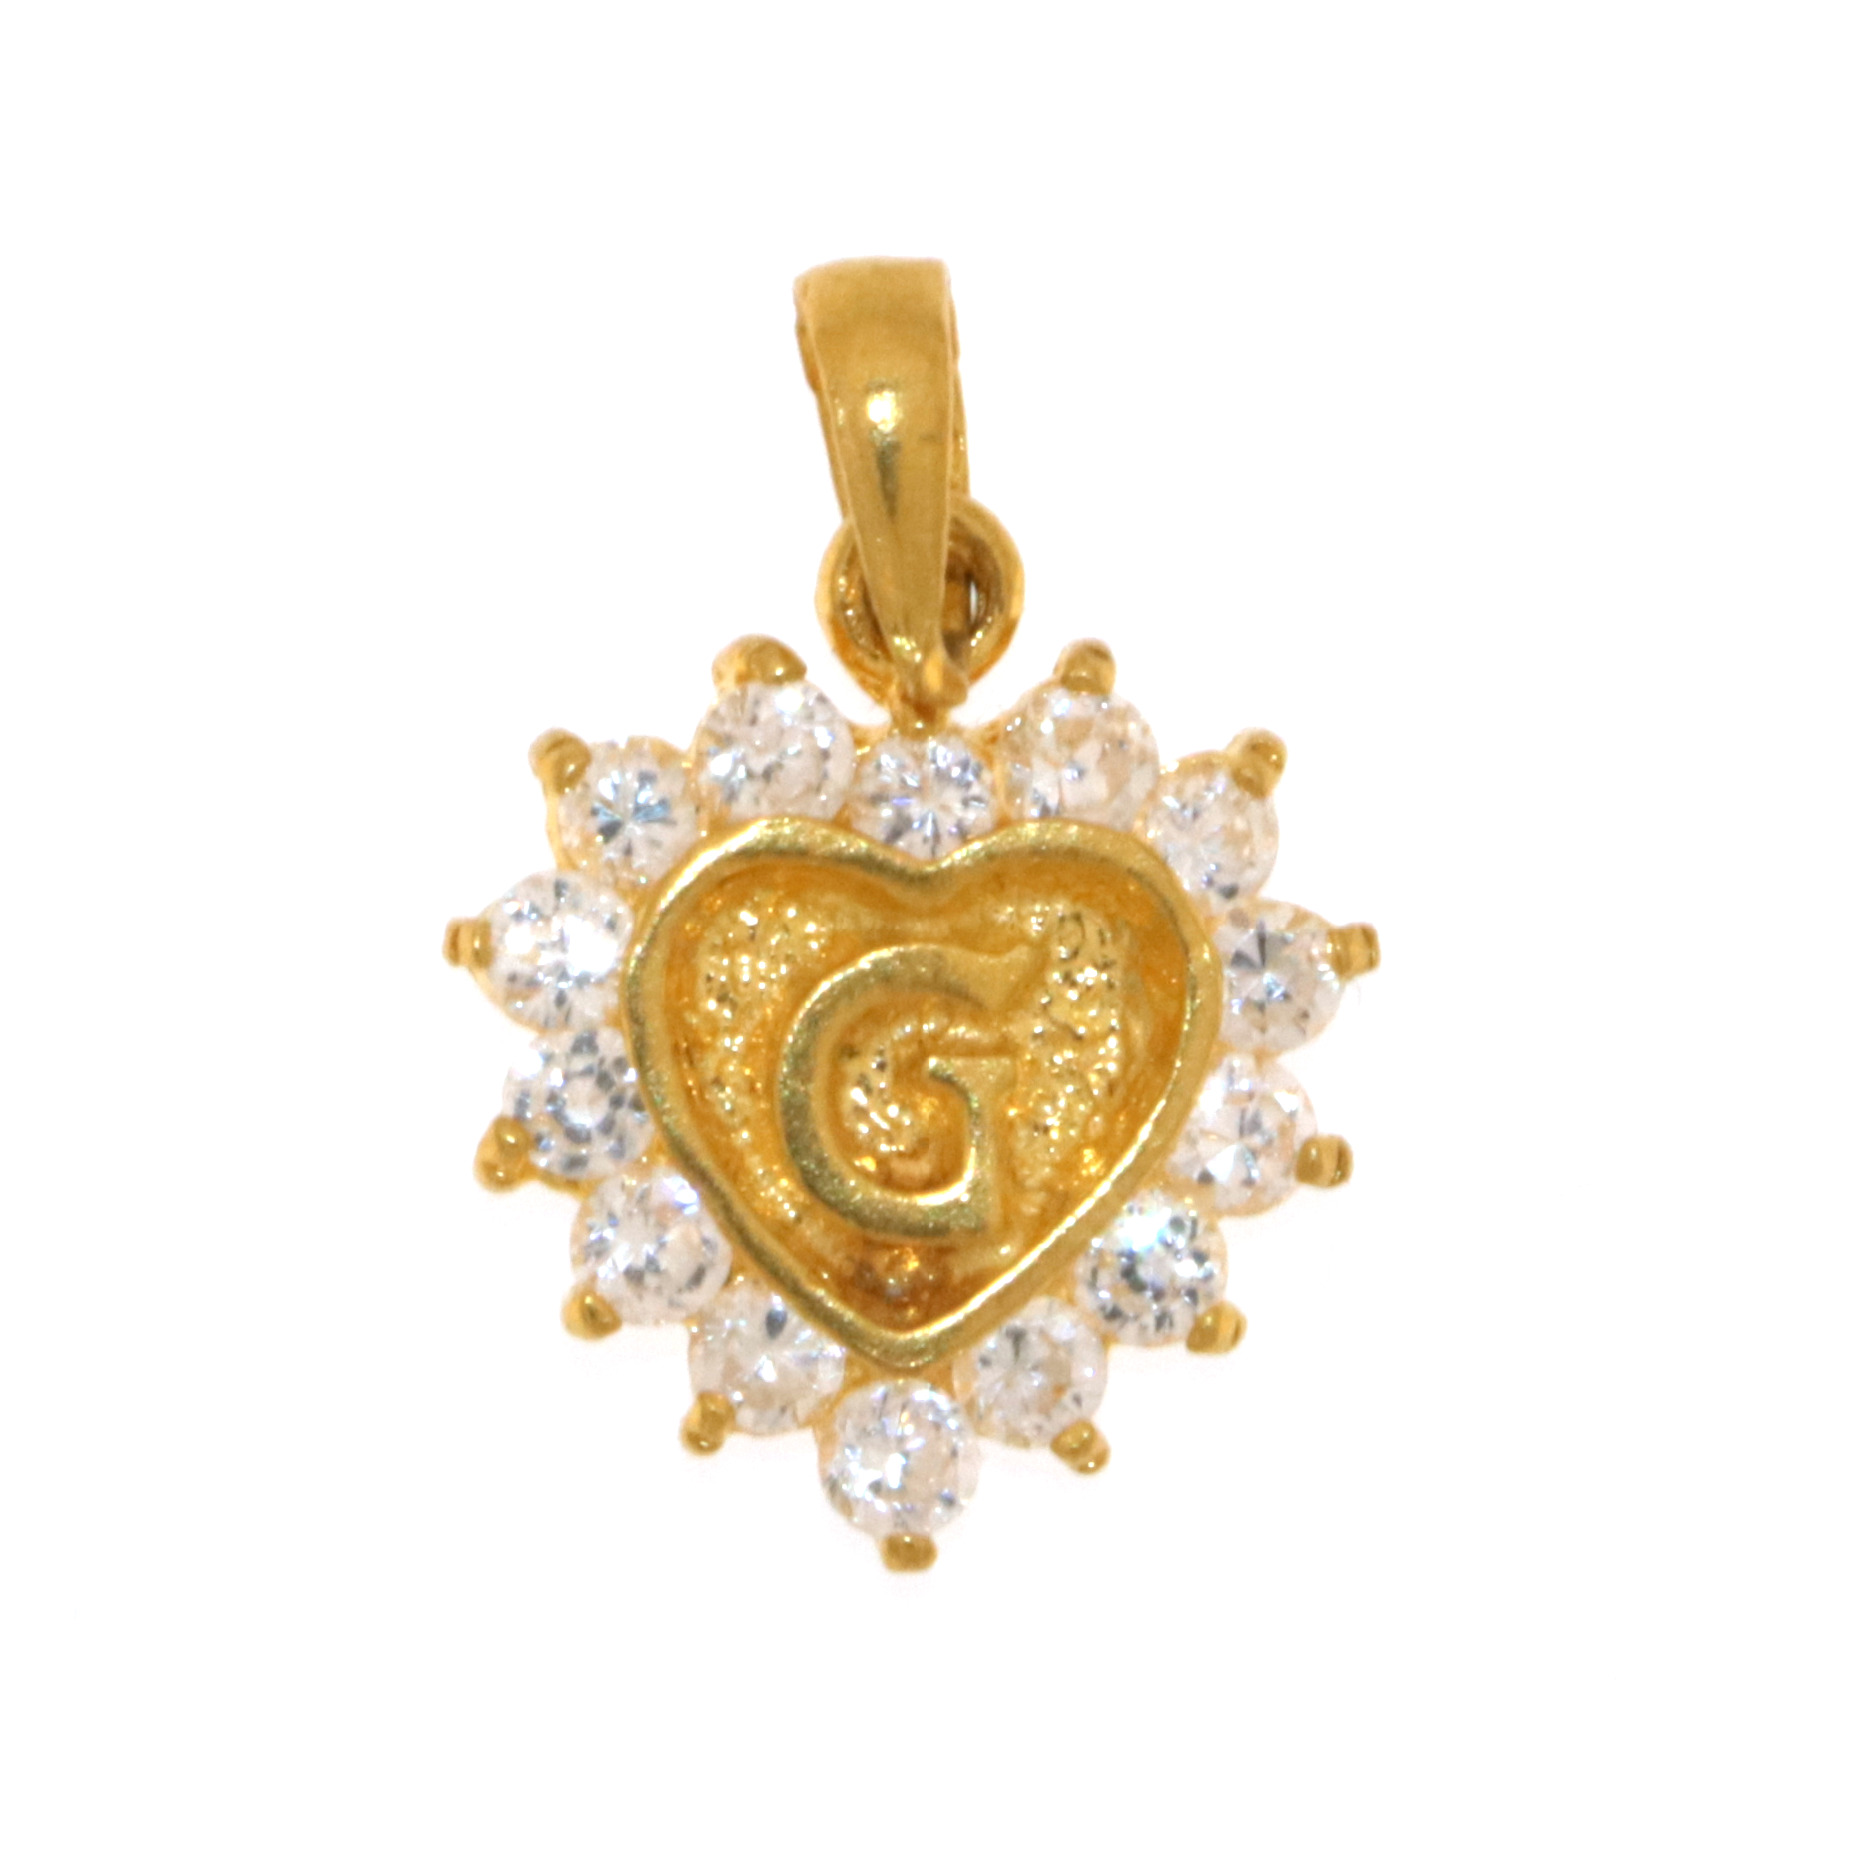 22ct Real Gold Asian/Indian/Pakistani Style 'G' Heart Pendant